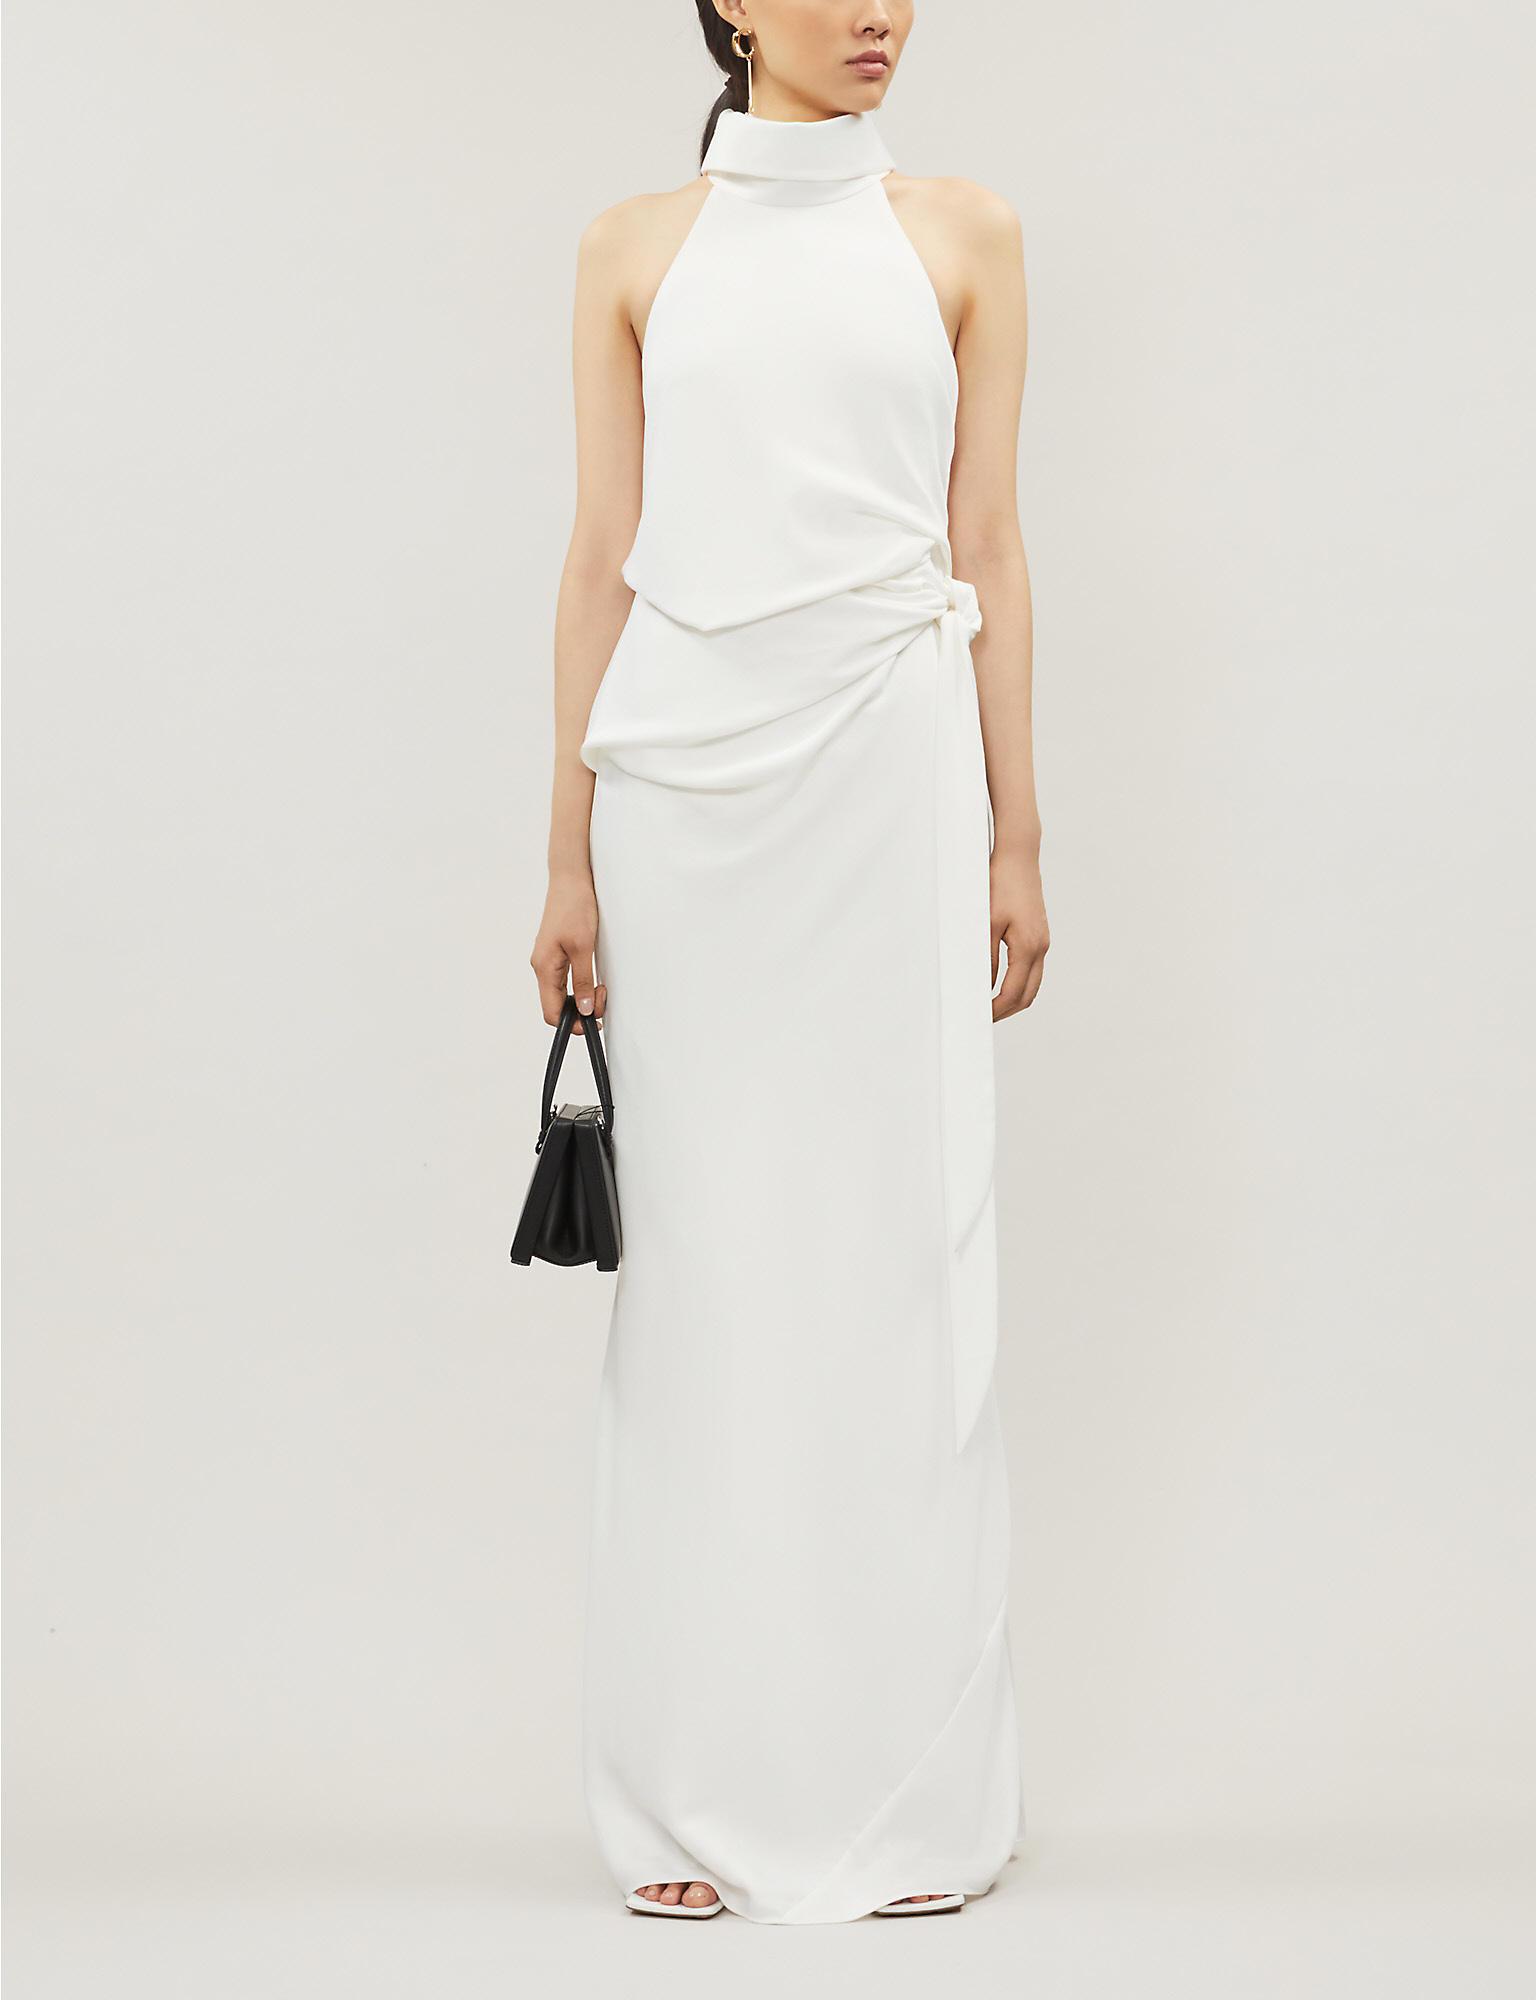 Camilla & Marc Foxglove Ruched Halterneck Crepe Gown in White | Lyst